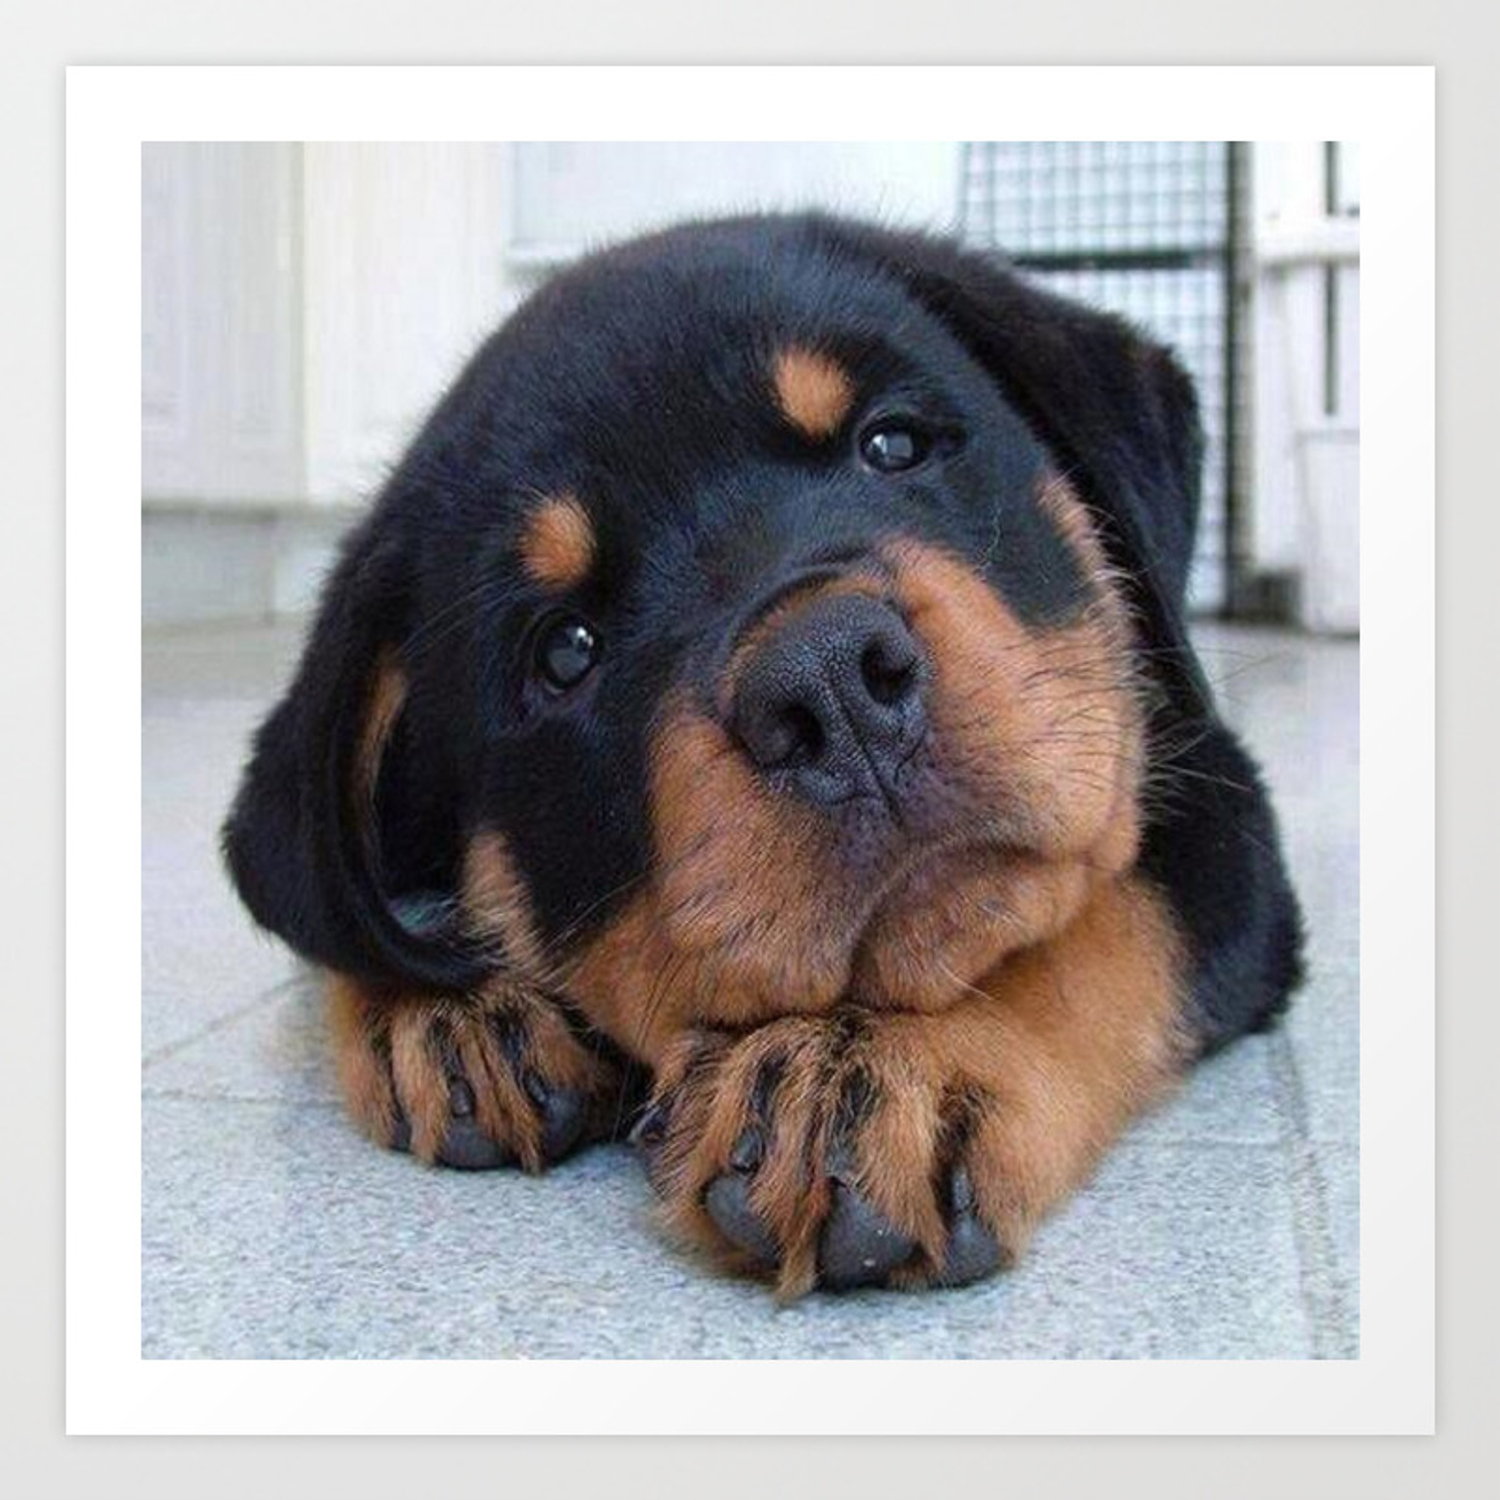 A Rottweiler puppy lying on the floor